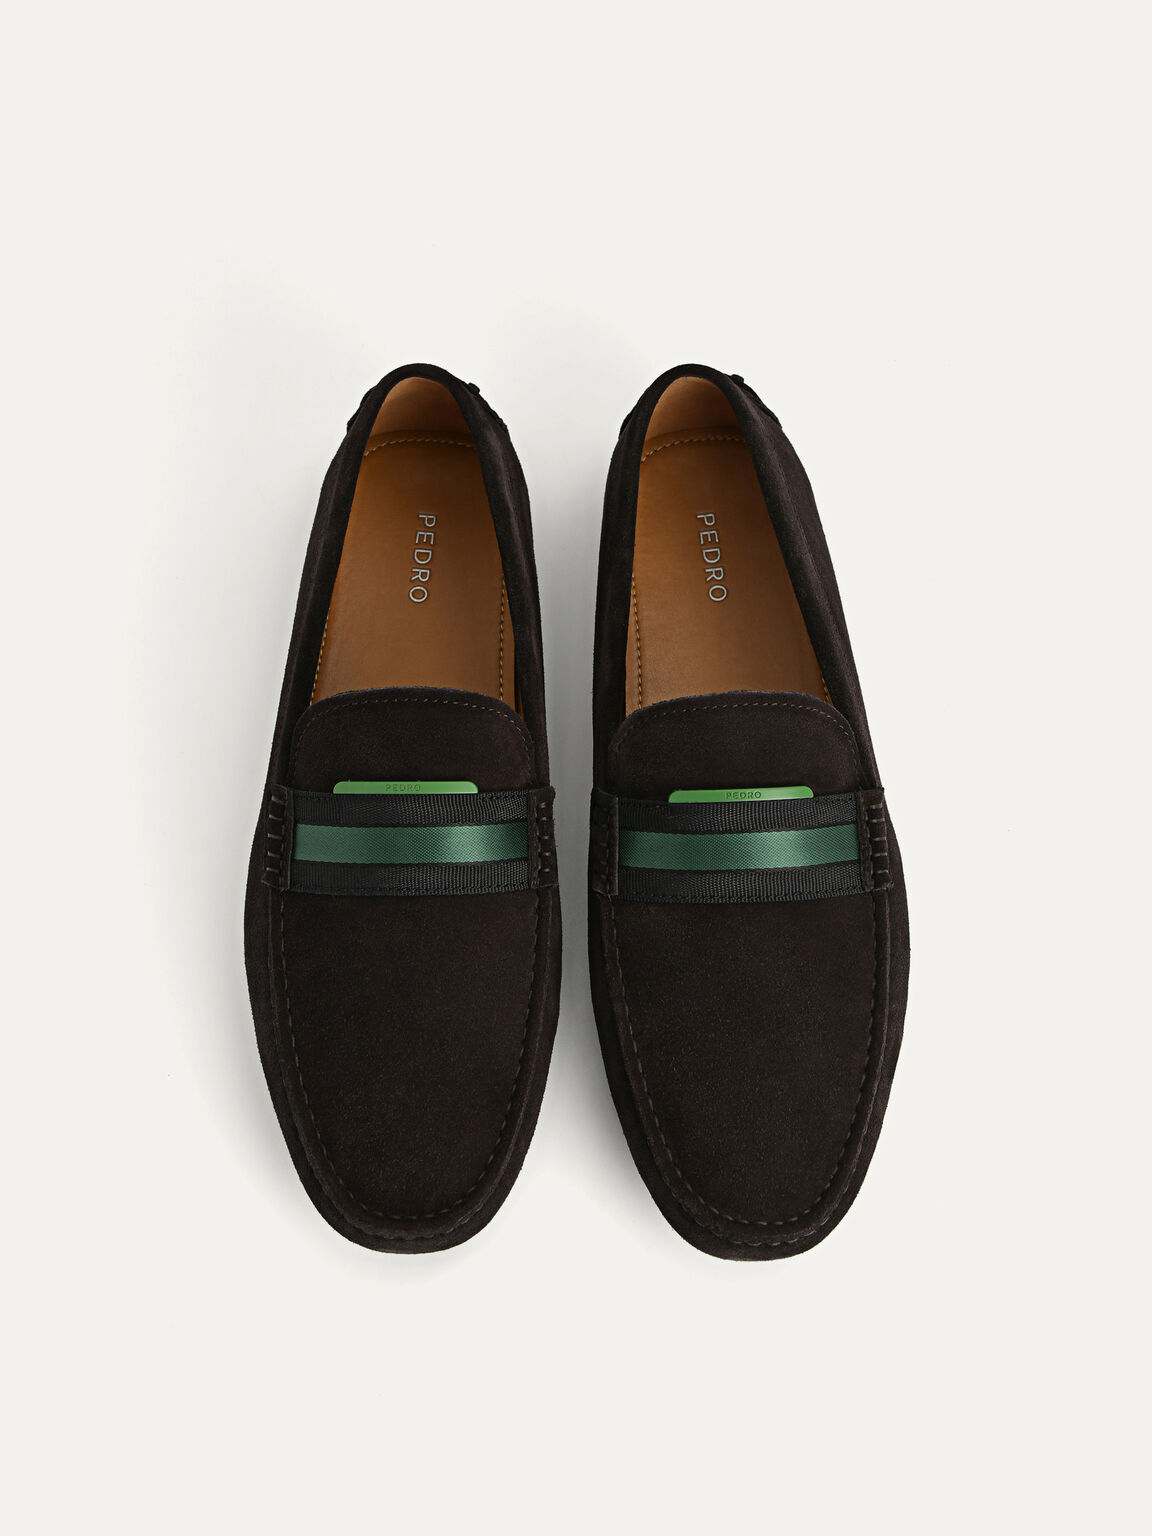 Suede Moccasins with Nylon Band, Dark Brown